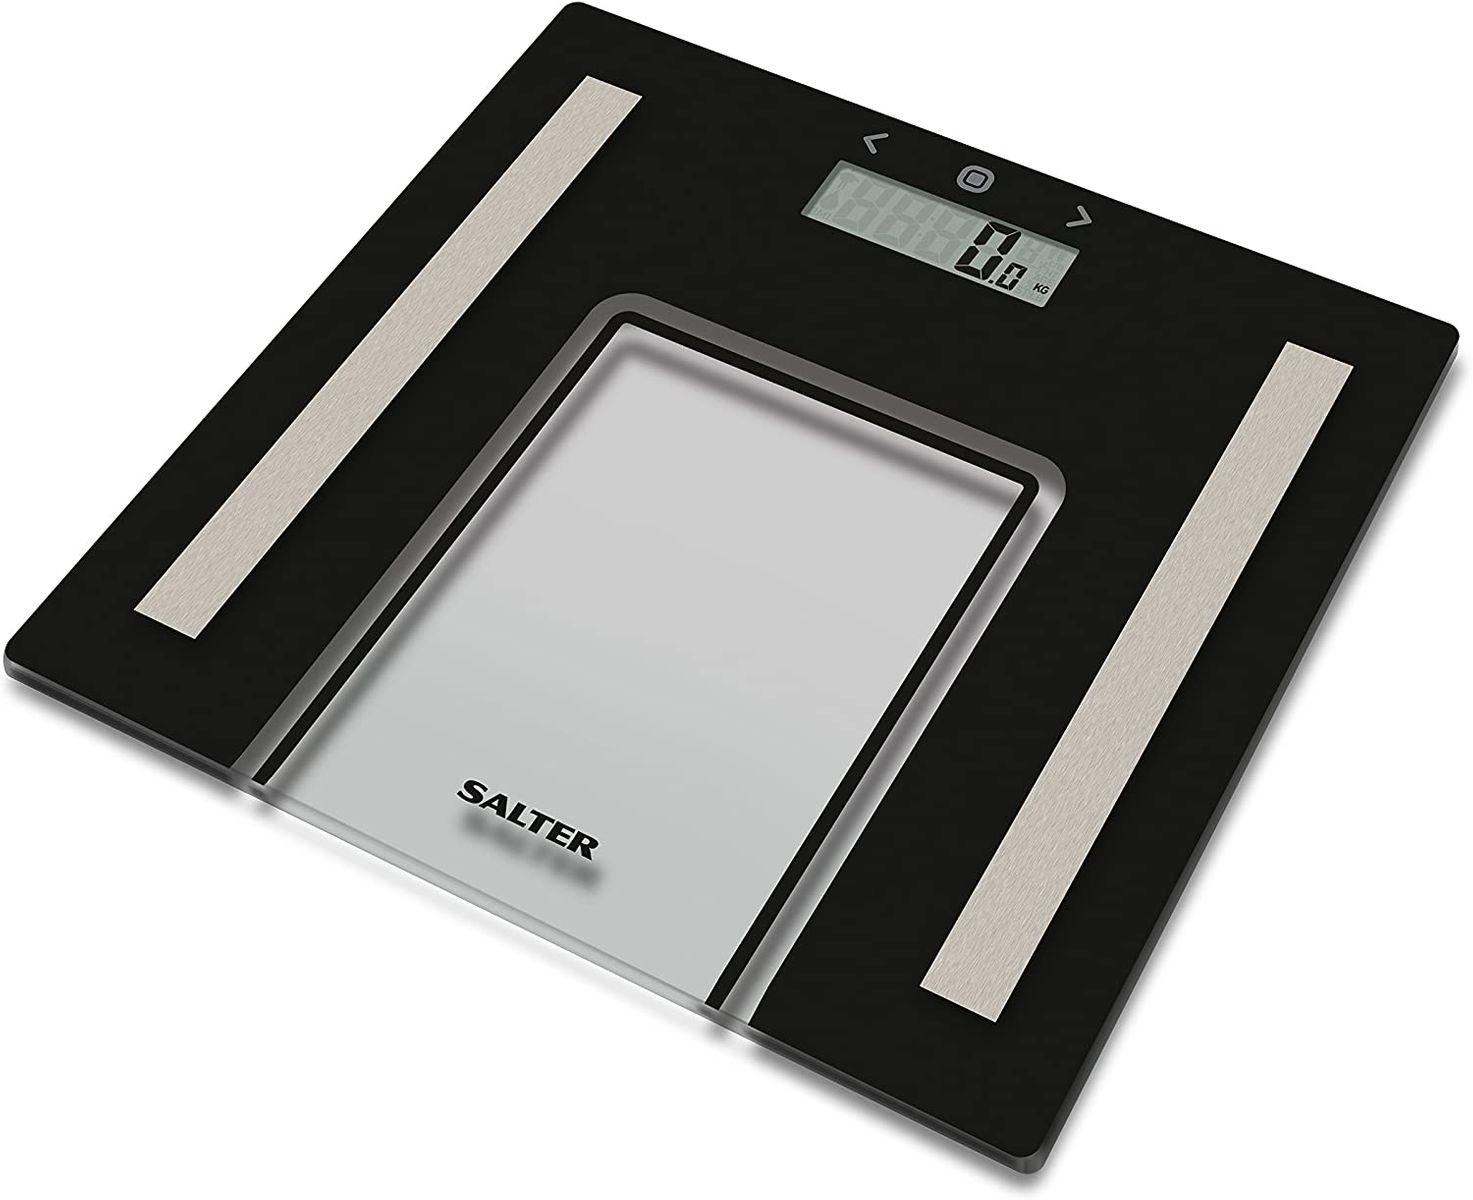 SALTER glass analytical scale, Weigh weight, body fat, body water percentage, BMI, Person memory for up to 8 people, Athlete mode, Slim design, Easy to read display.